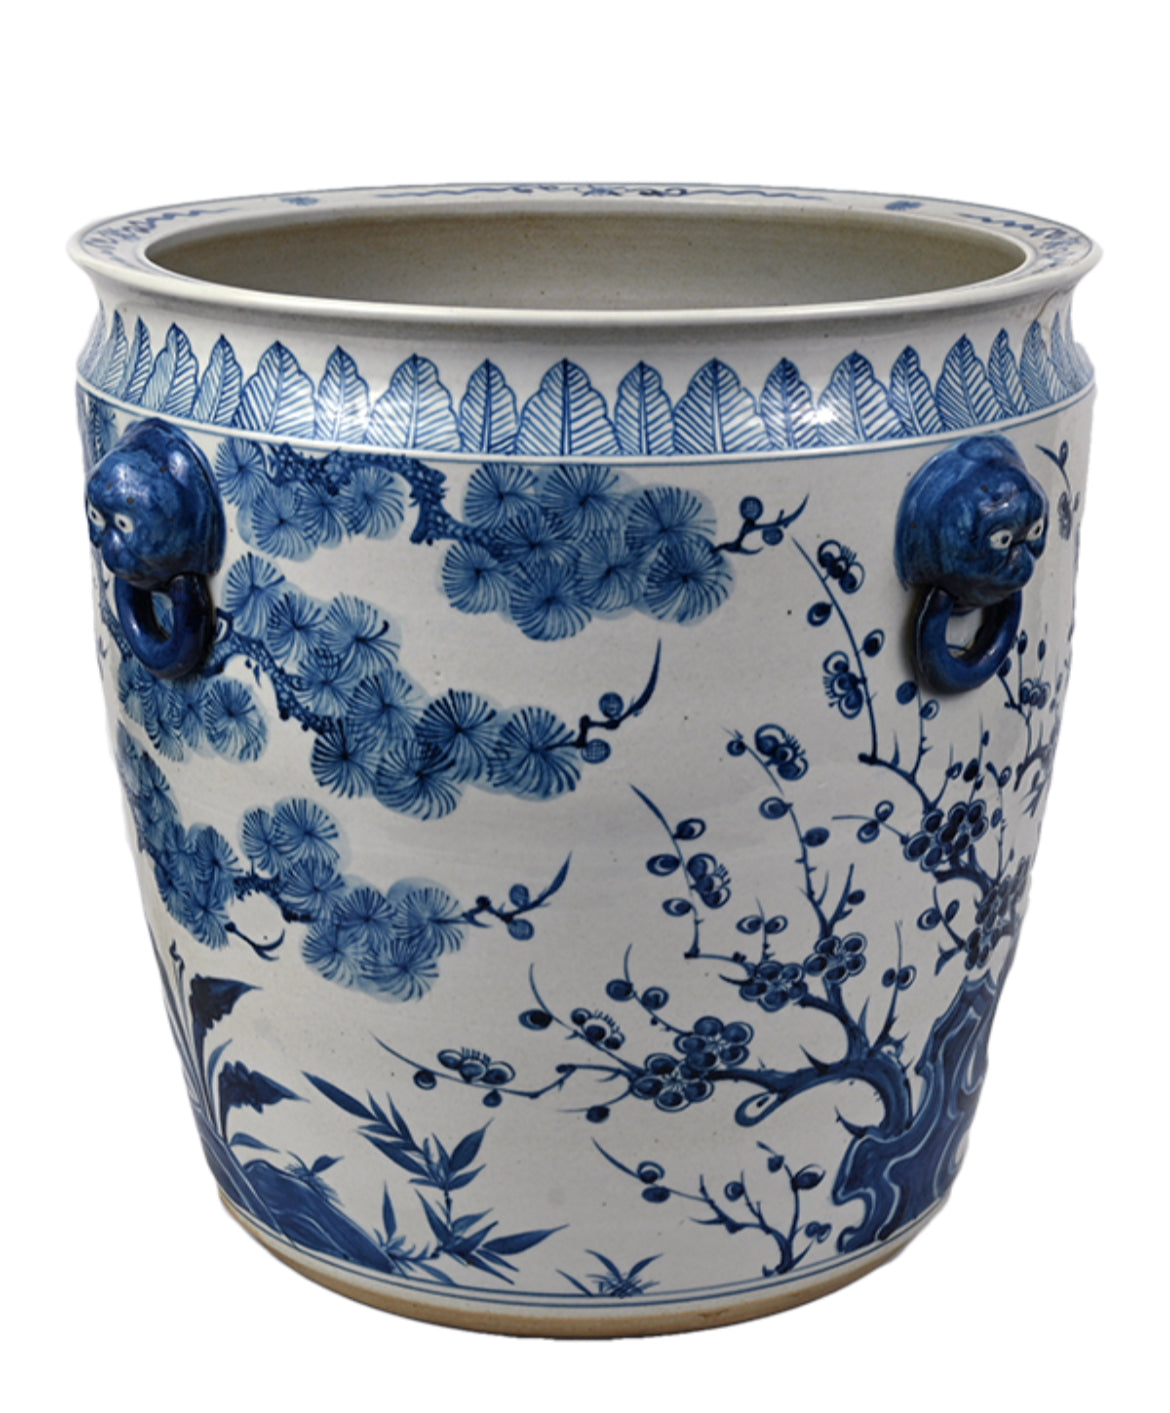 Antique-Style Blue and White Extra Large Planter with Tree Pattern